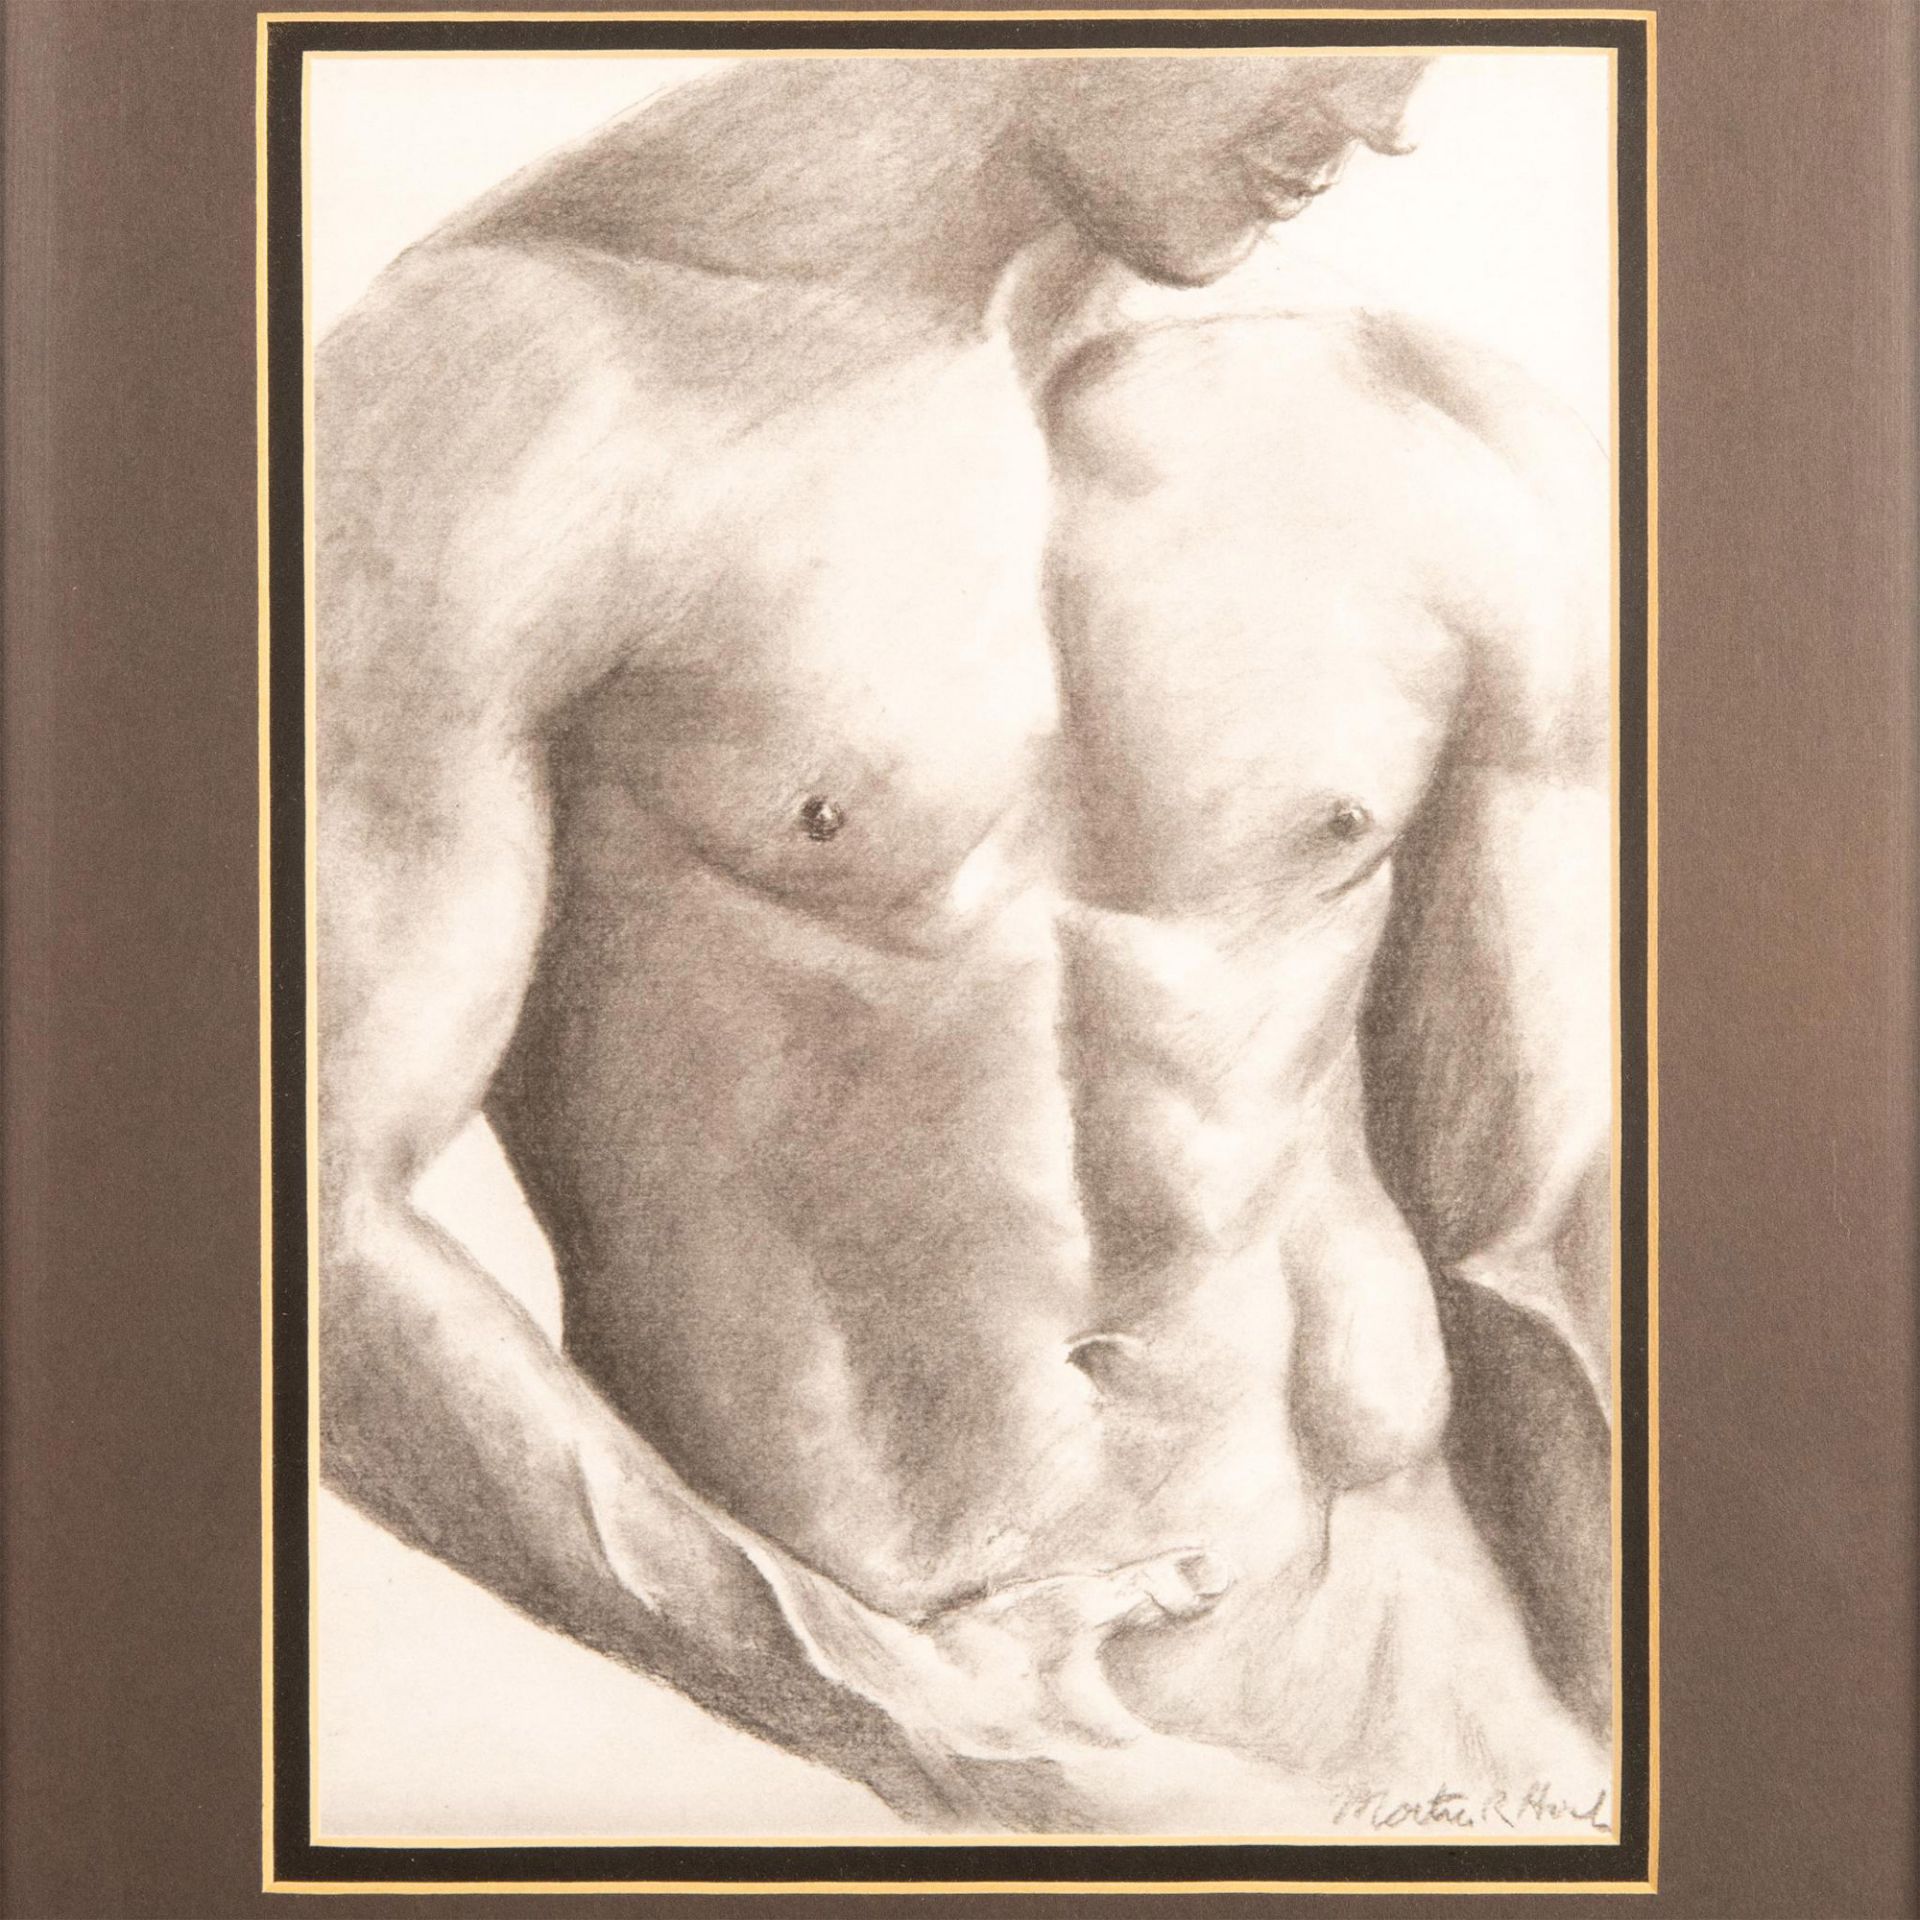 Original Drawing on Paper, Homoerotic Male Nude Torso Signed - Image 2 of 5